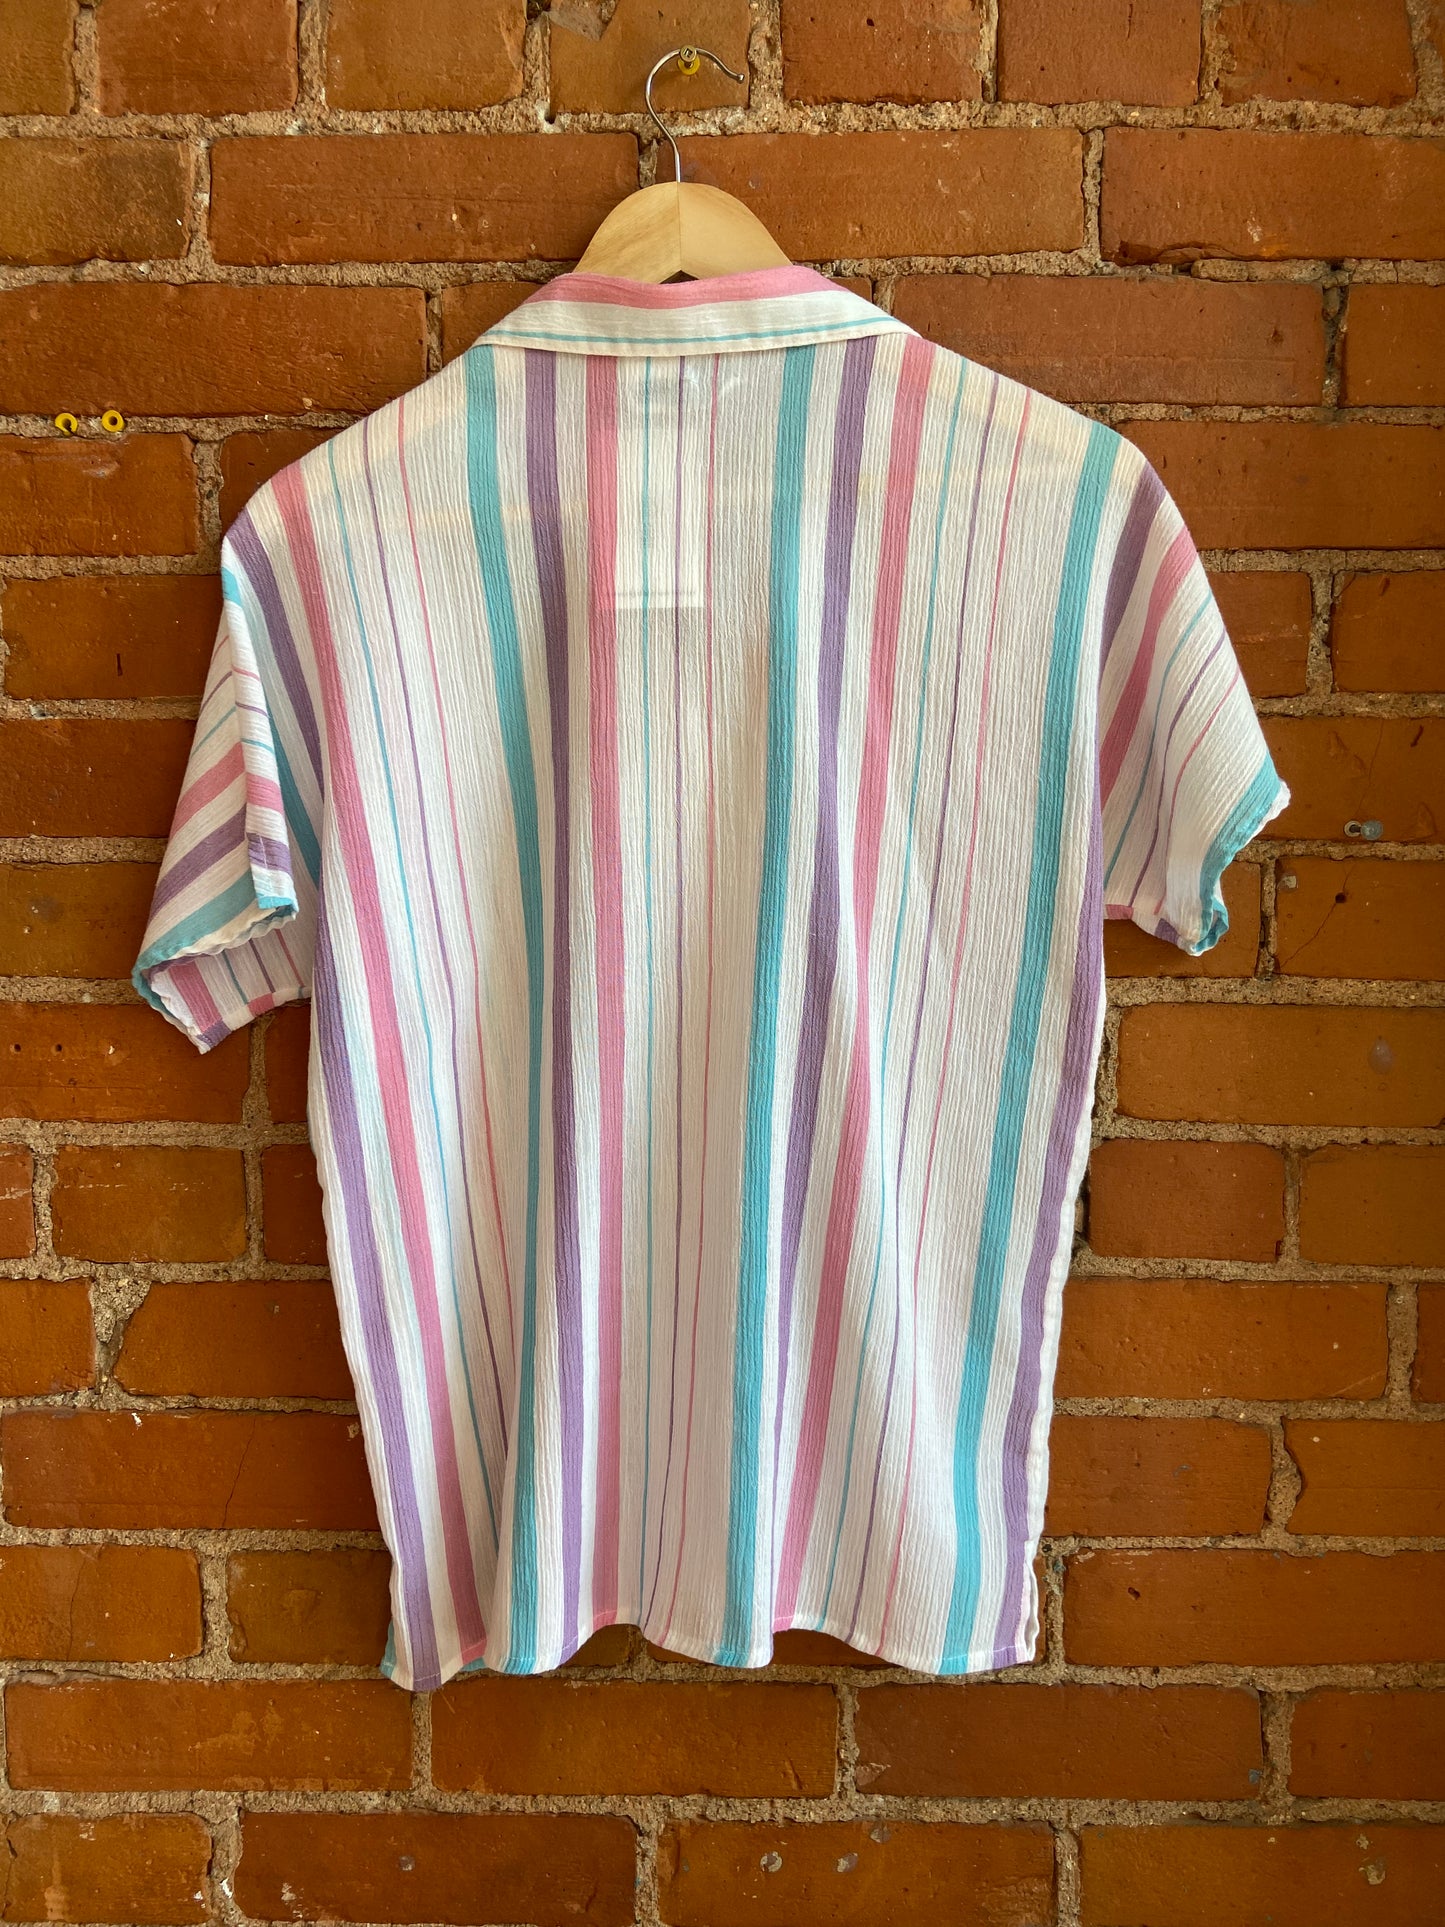 70’s Short Sleeve Top with Colorful Stripes